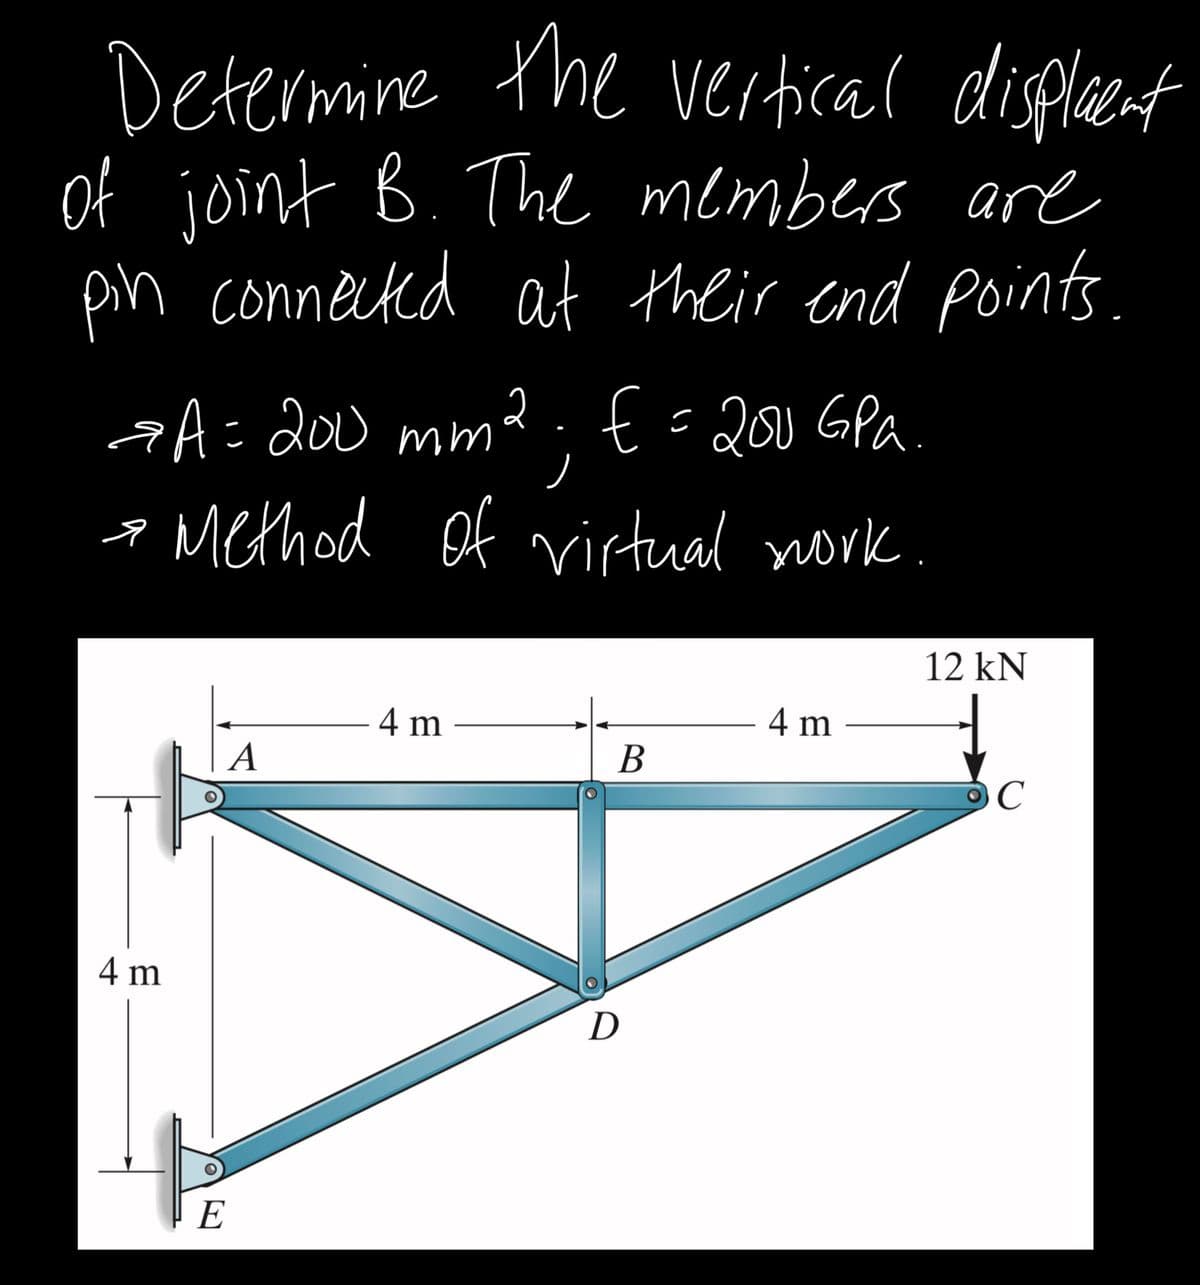 Determine the vertical displecent
of joint B. The members are
pn connected at their end points.
aA= 200 mm2 . E=200 GPA
a Method of irtual nork
12 kN
4 m
4 m
A
В
4 m
D
E
